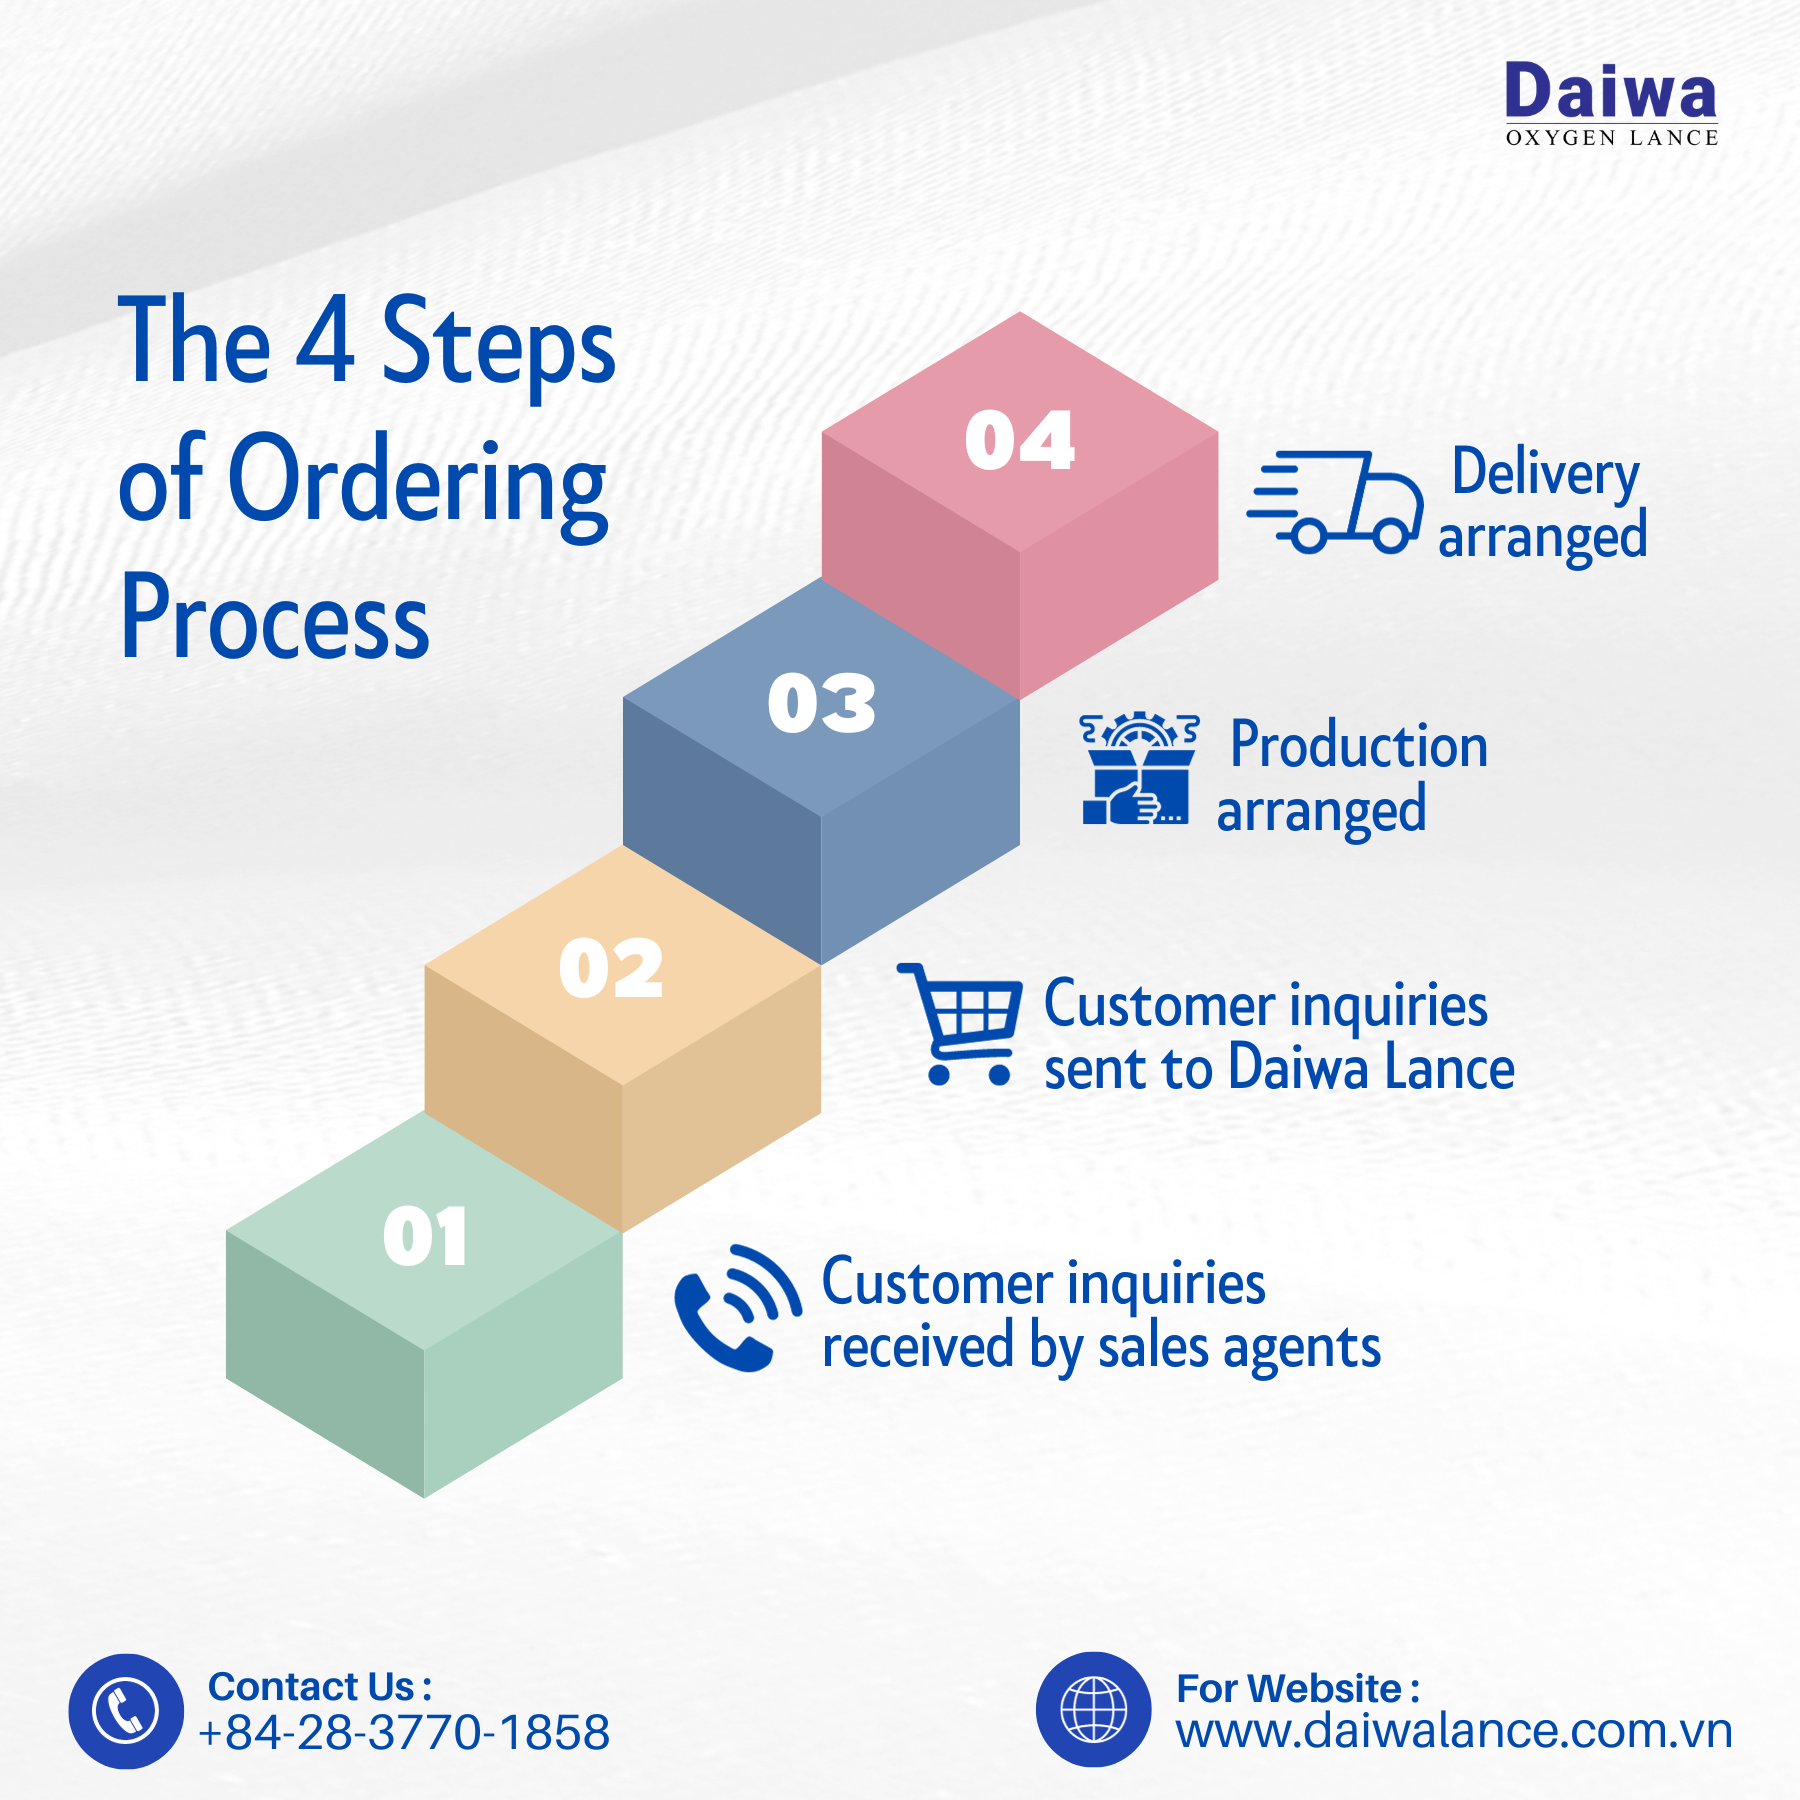 The 4 Steps of Ordering Process